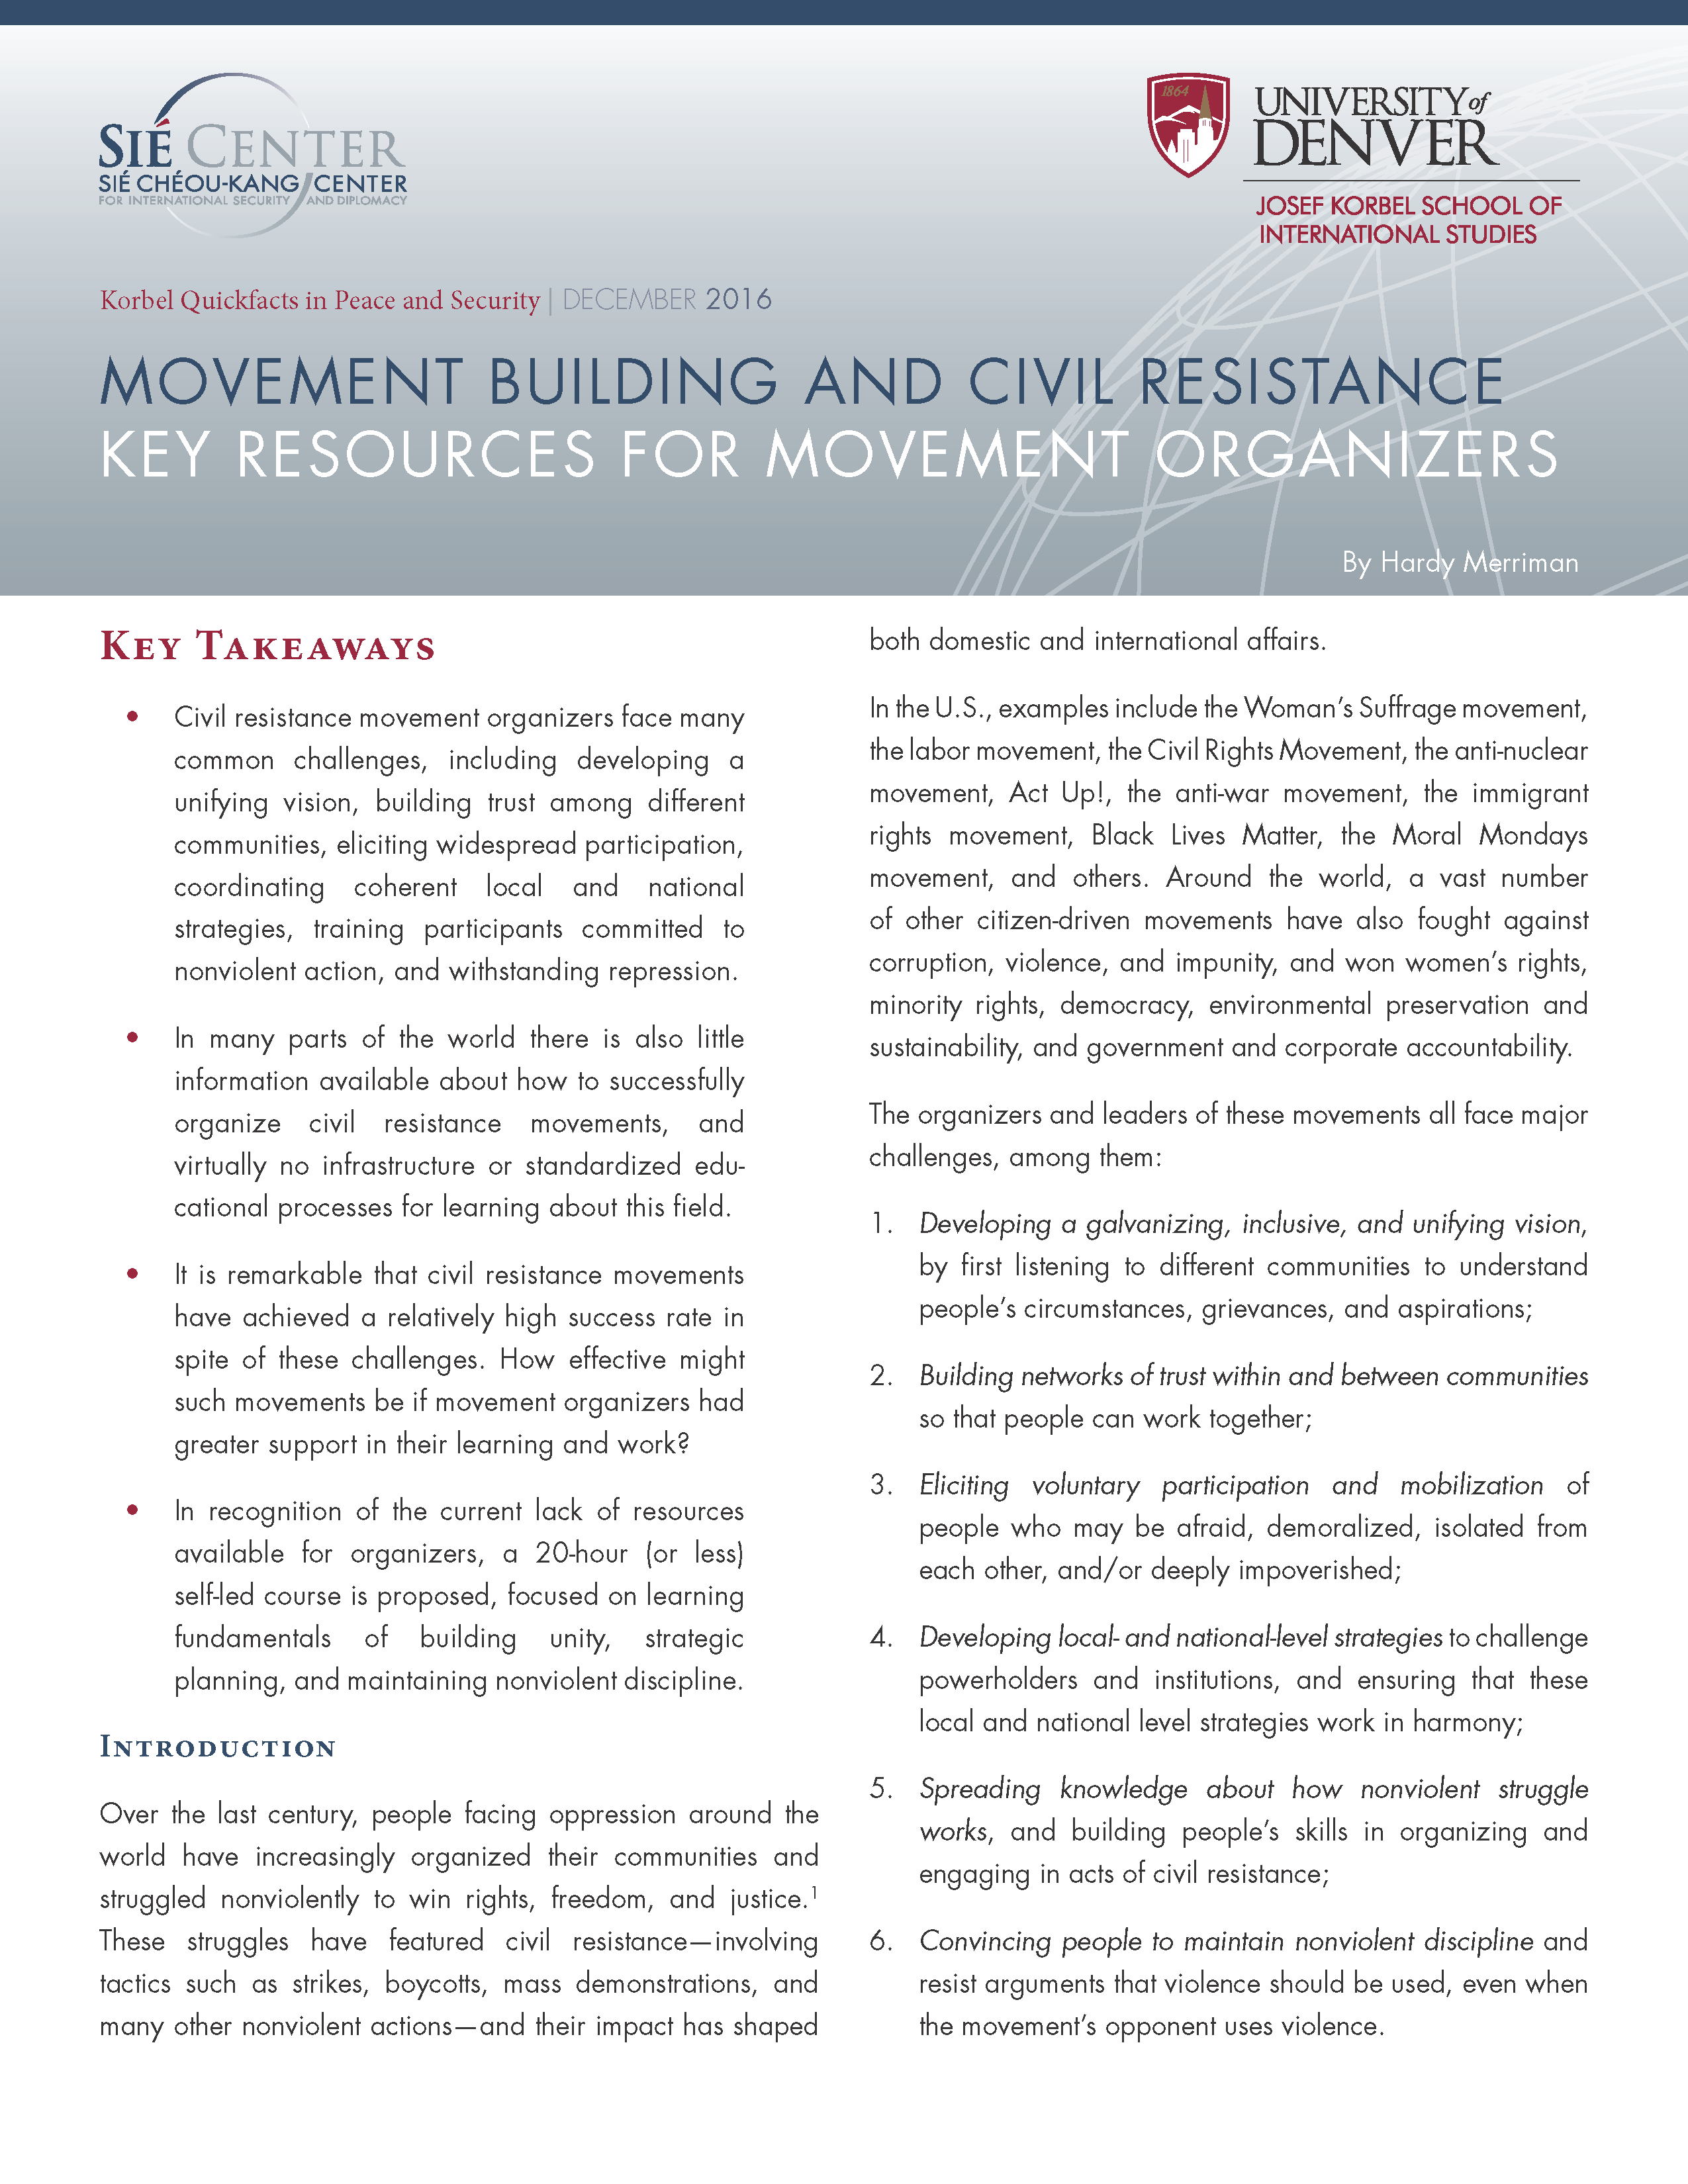 Movement Building and Civil Resistance: Key Resources for Movement Organizers